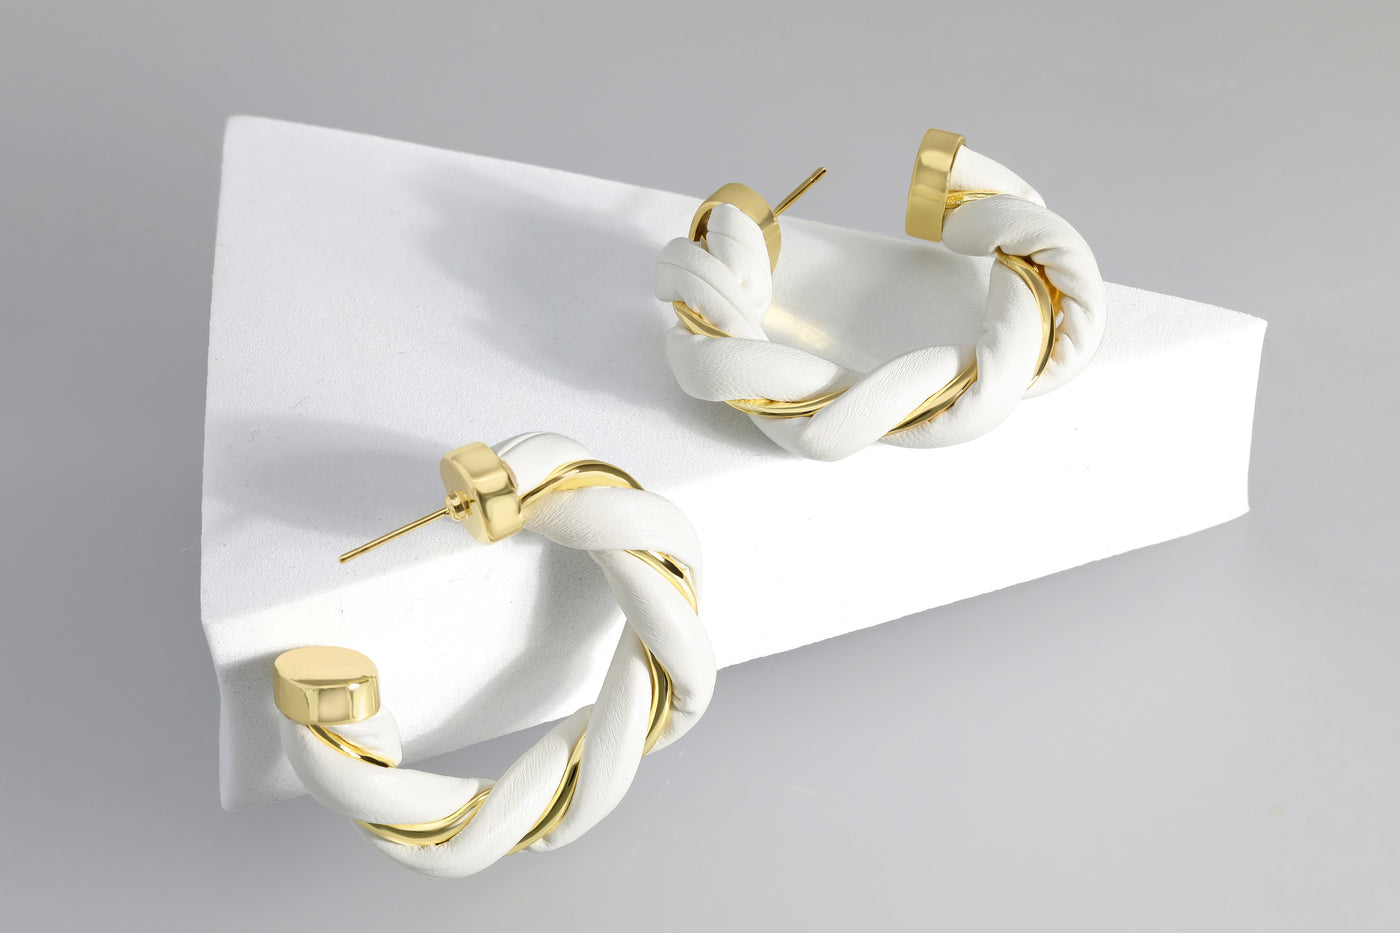 Gold-Plated Twisted Leather Hoop Earrings with Gift Pouch